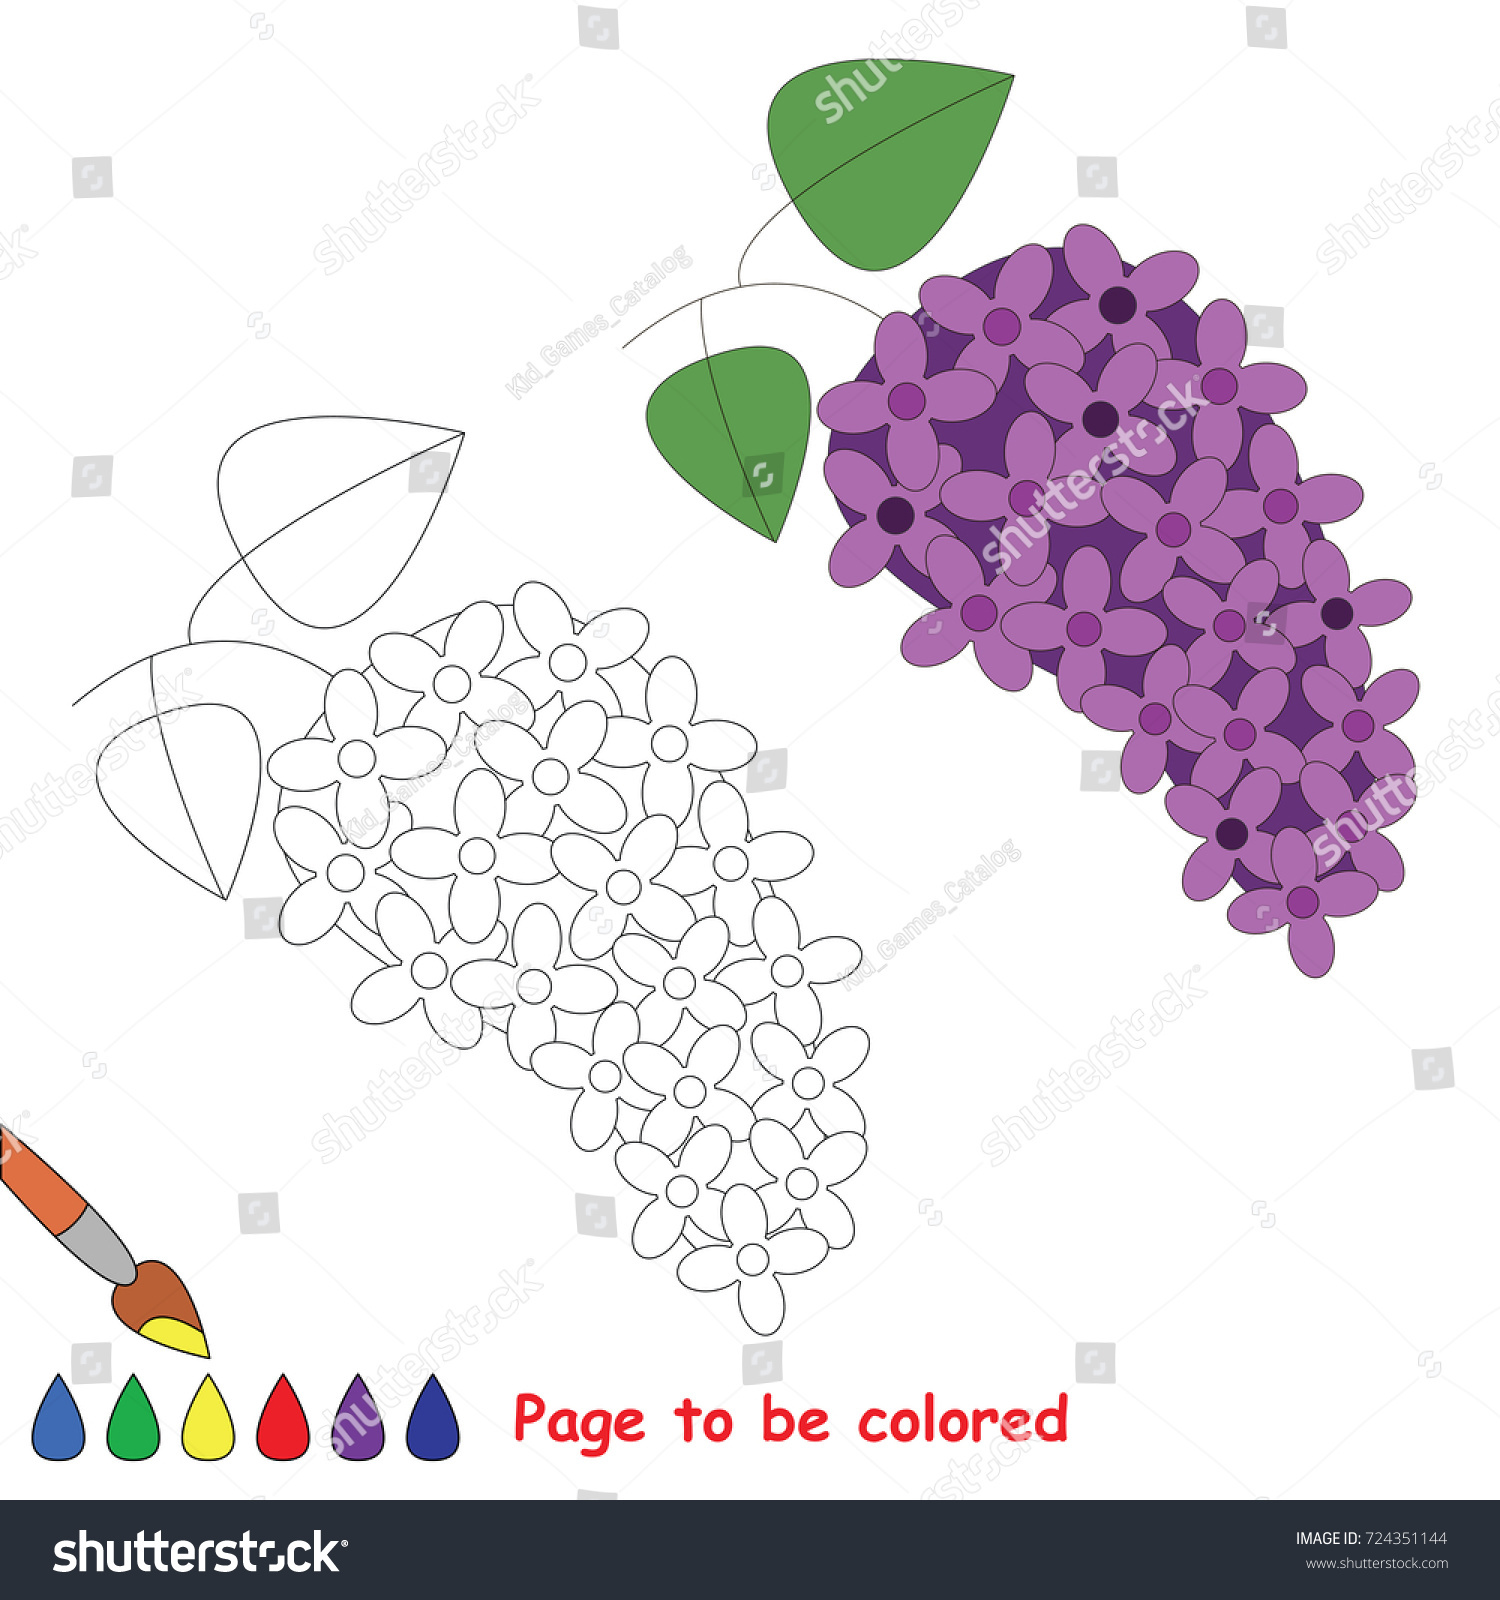 Lilac flower be colored coloring book stock vector royalty free